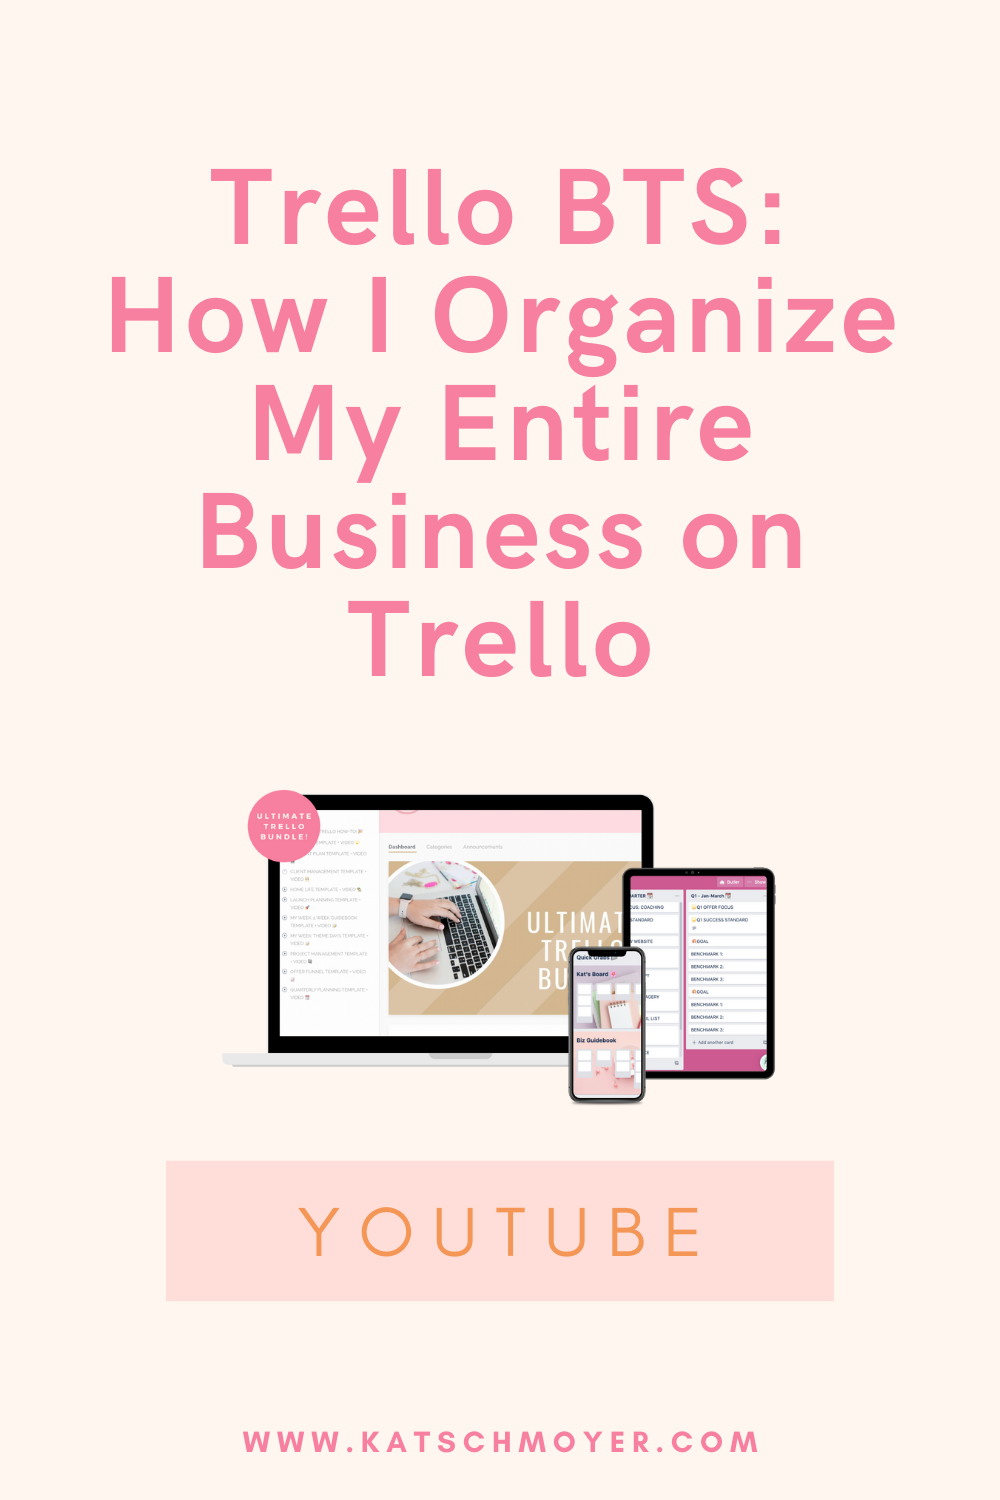 How I Organize My Entire Business on Trello